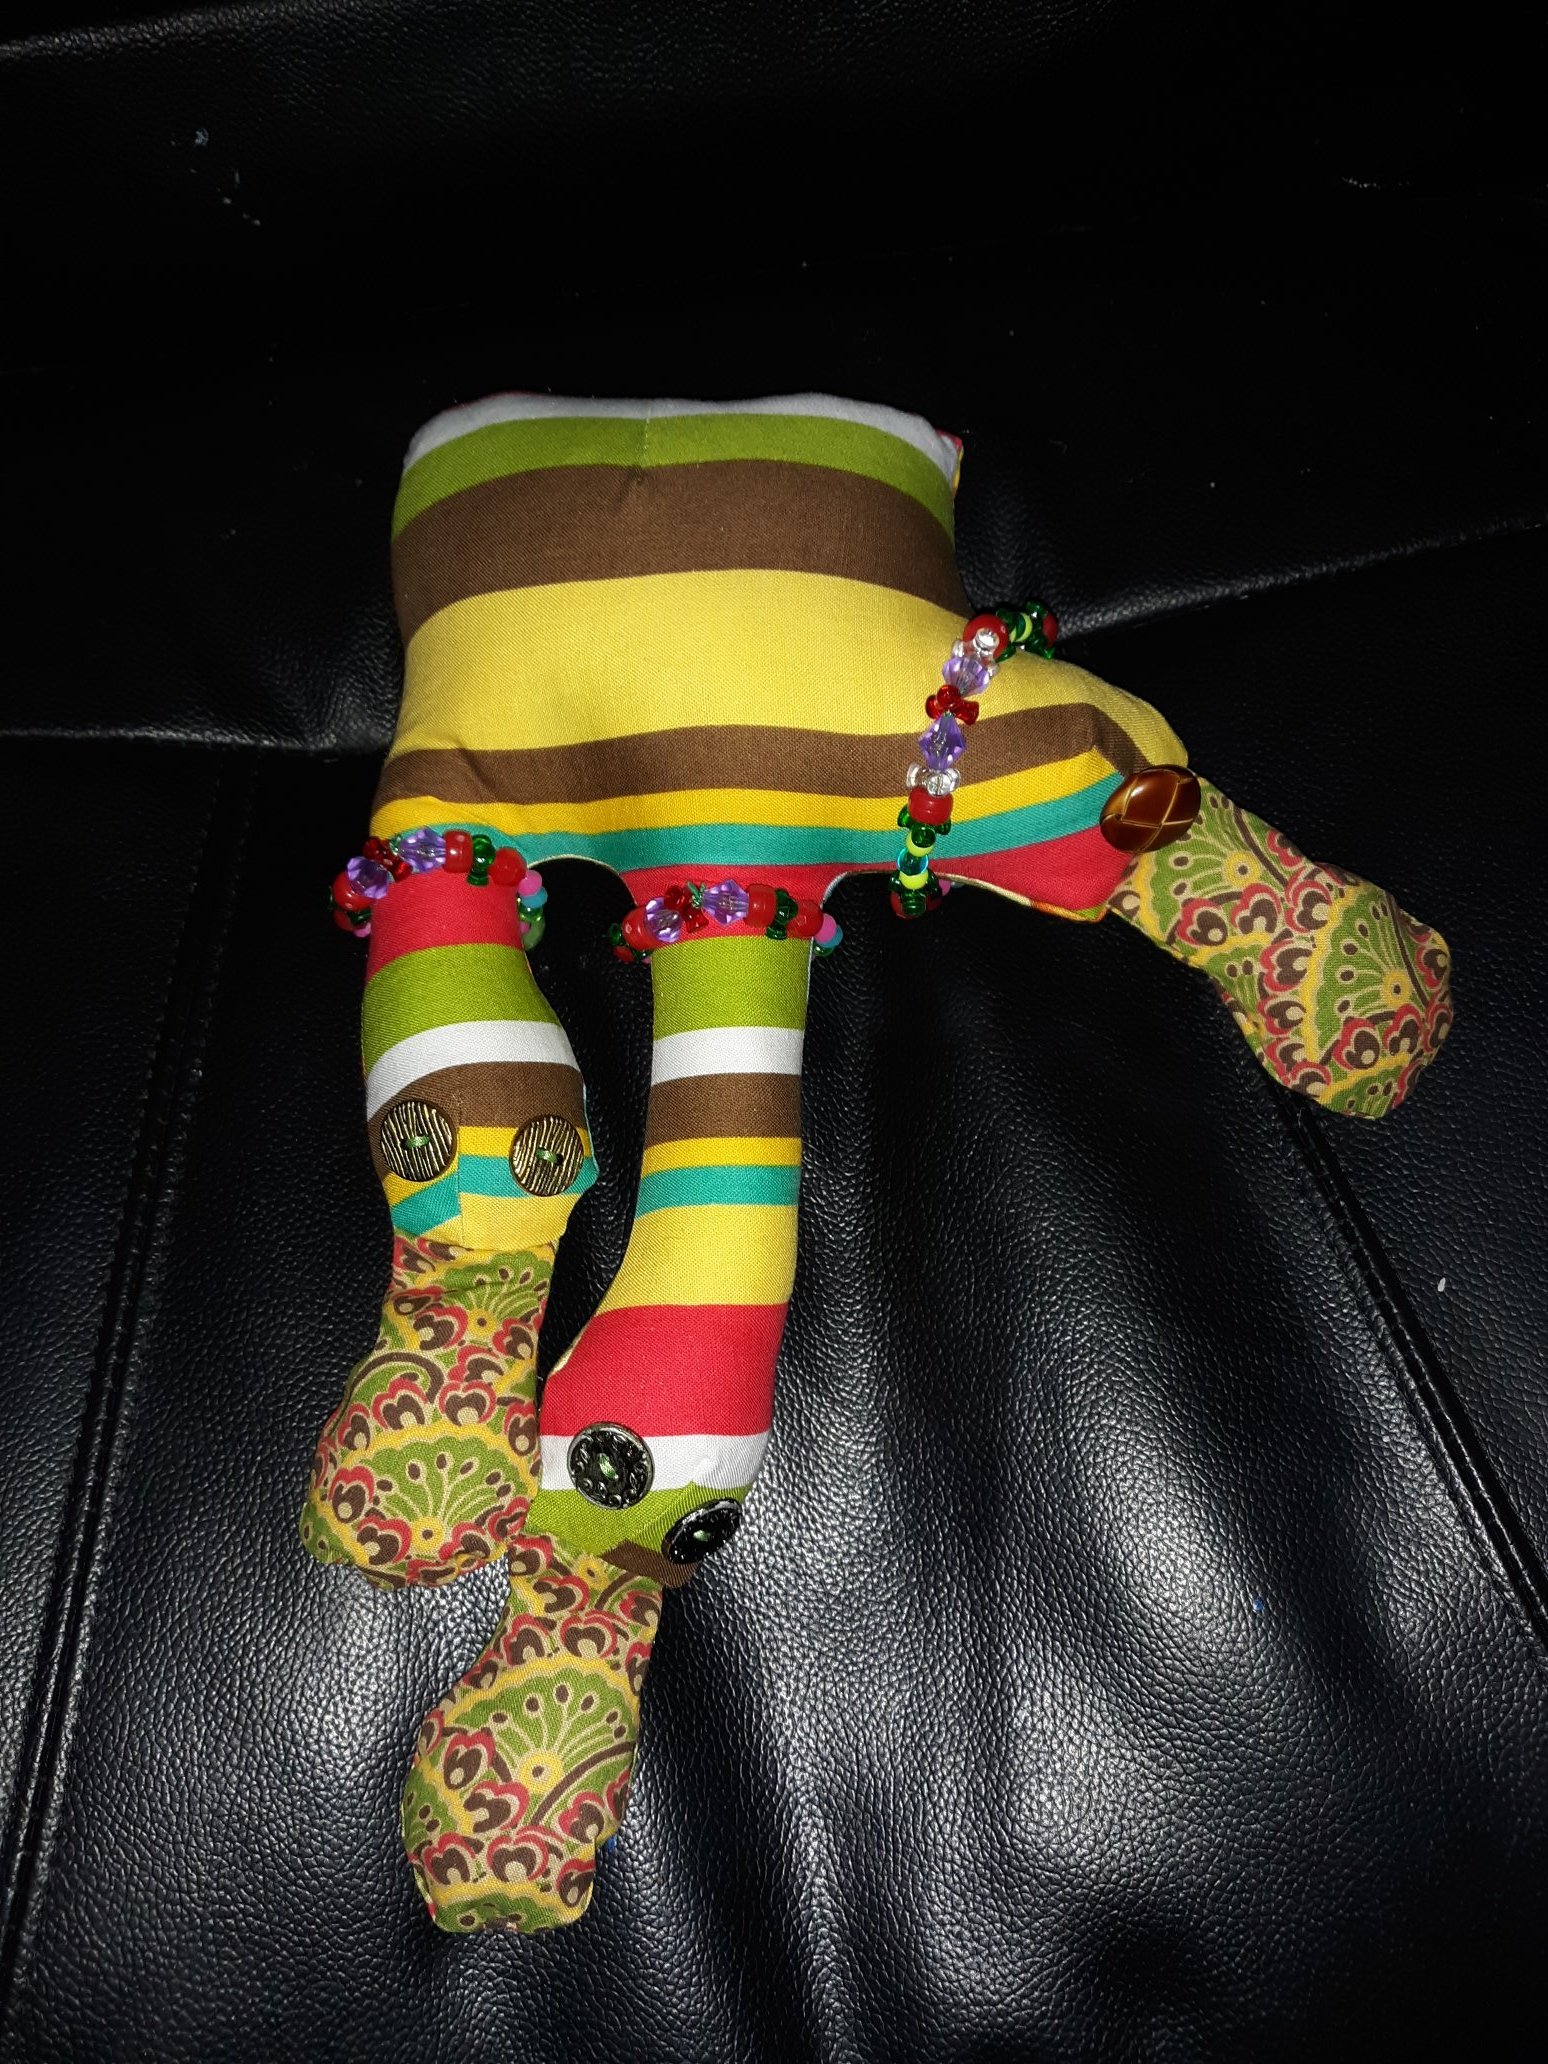 A three headed doll. The body is mostly square shaped with three different sized heads coming out of it. The head on the far left has a thin neck with a larger round head coming out. It has two button eyes and a large tongue sticking out. The head in the middle has a longer neck with a round head coming out of it. It also has two button eyes and a tongue sticking out. The last head on the right is much shorter with only one button eye and a tongue sticking out. The body is a striped fabric with their tongue having a more intricate pattern on it. Each head is wearing a beaded necklace.